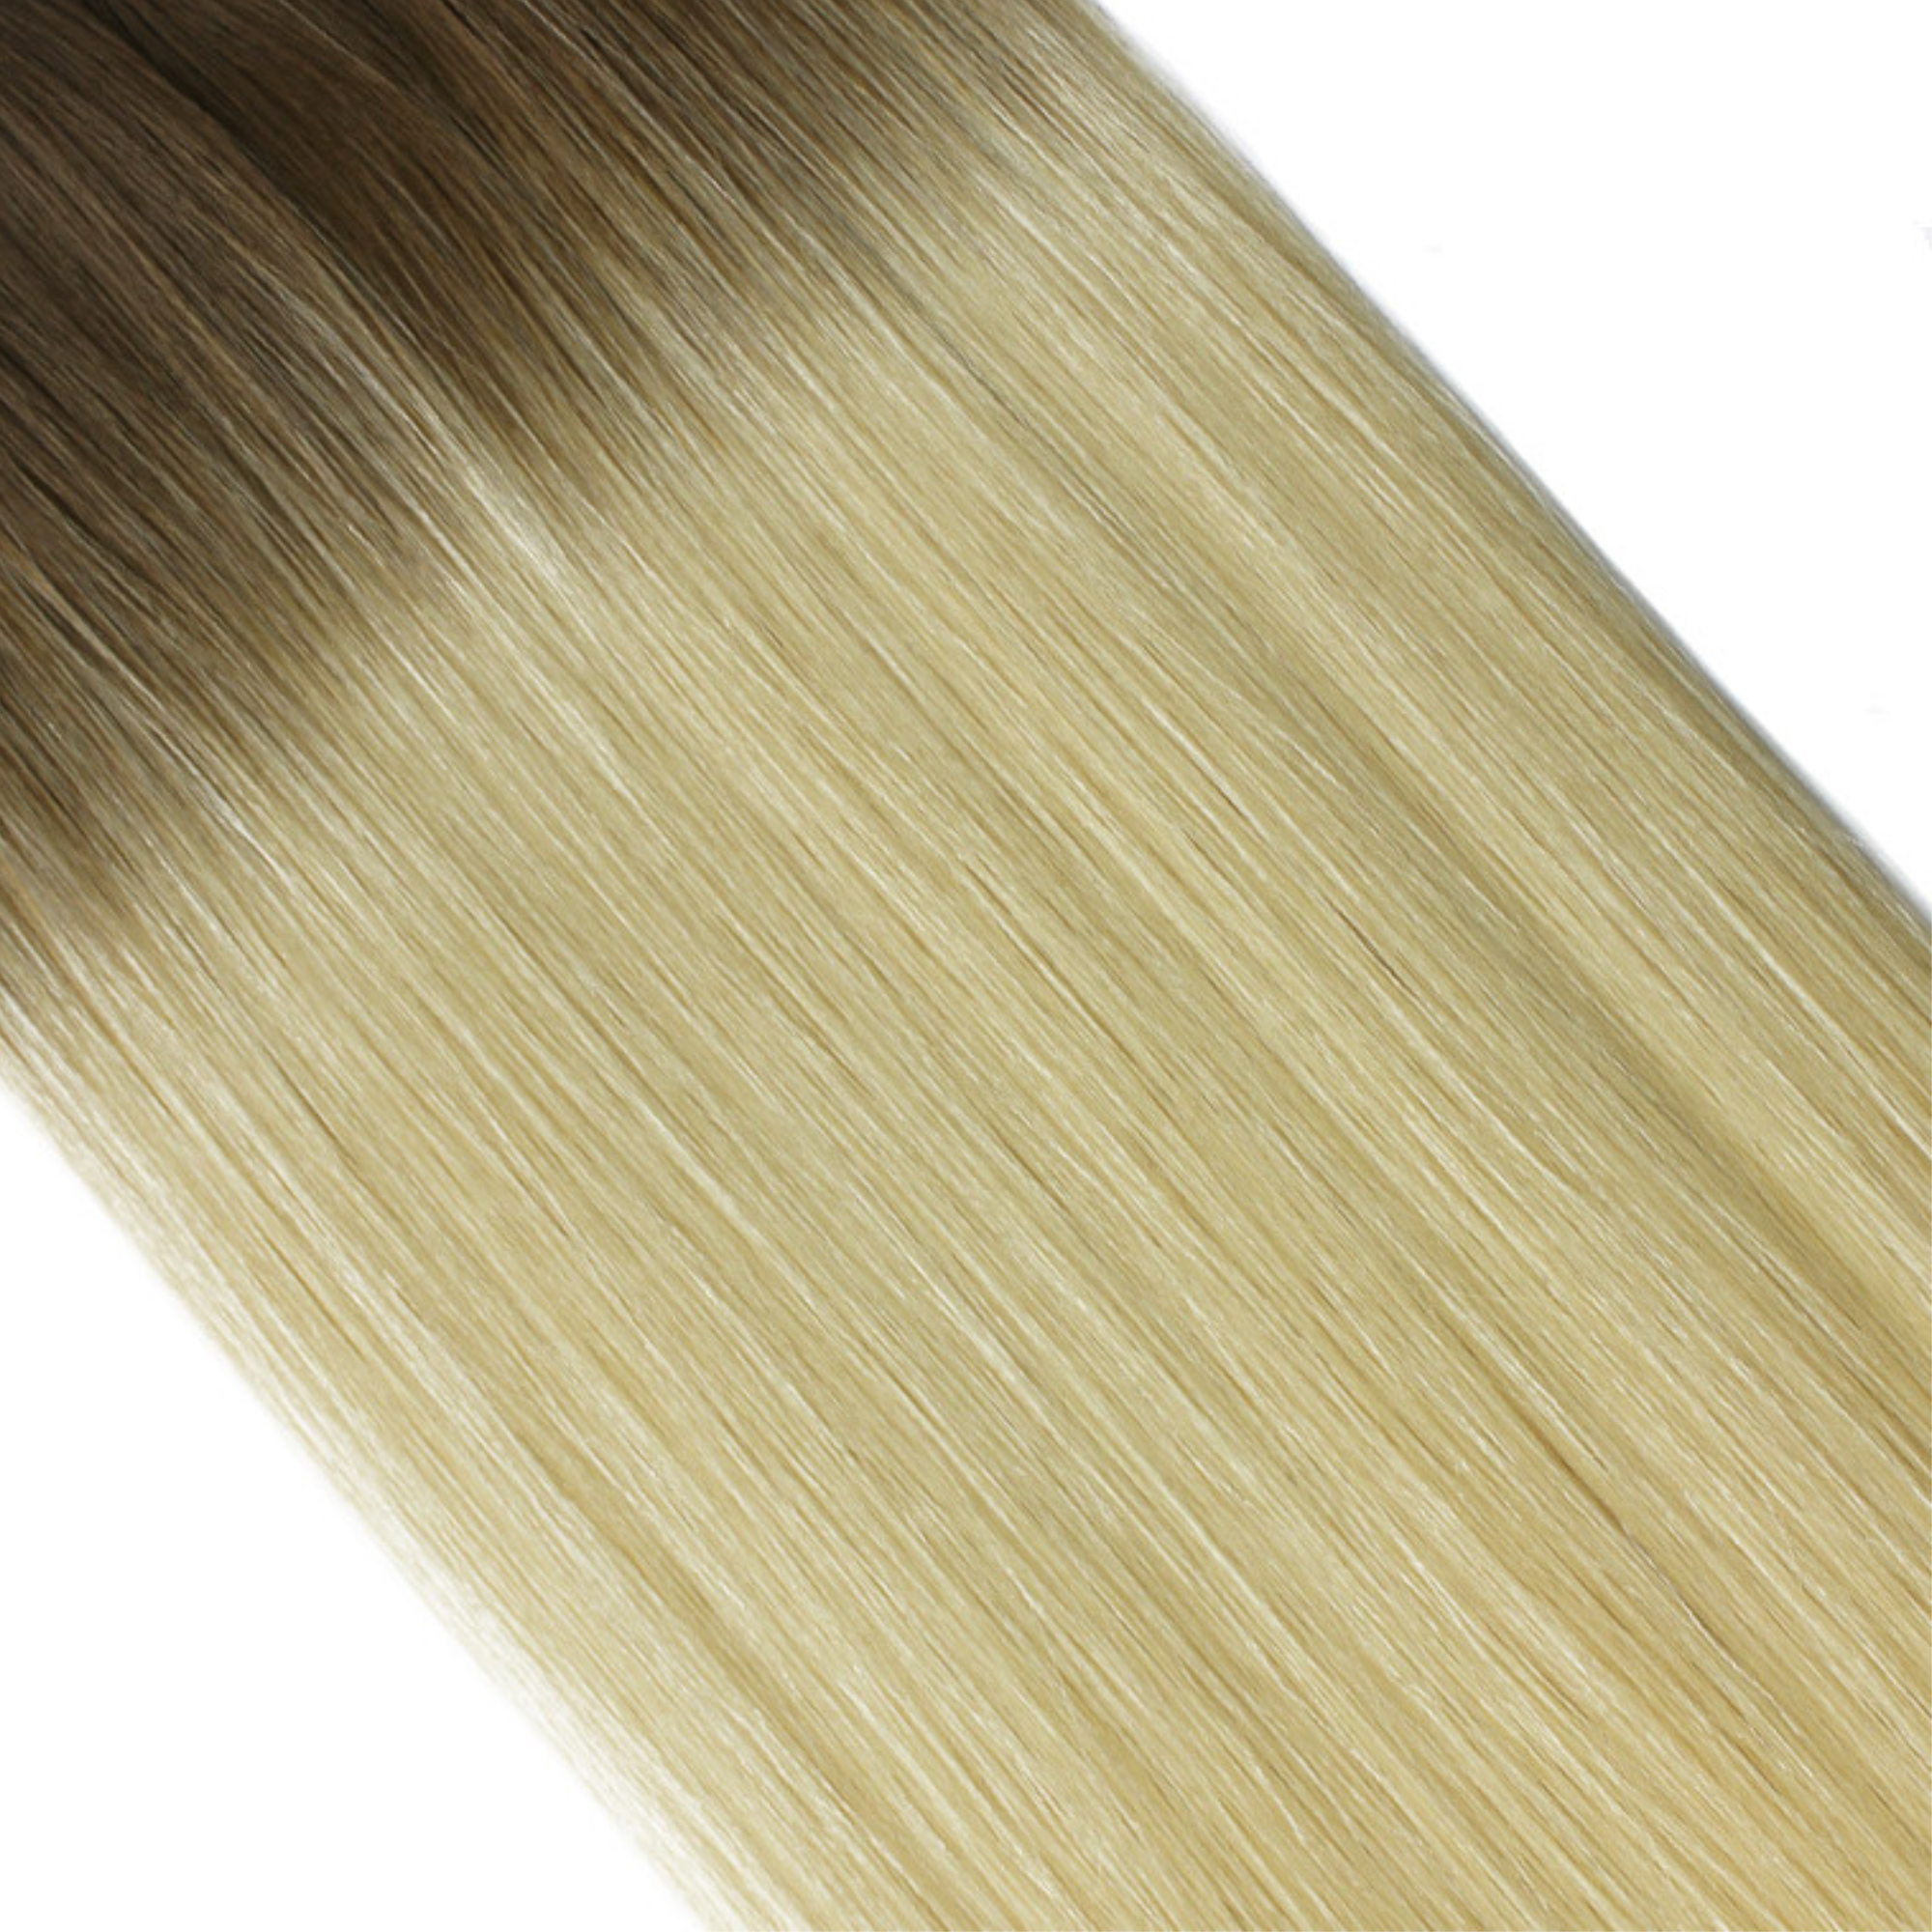 "hair rehab london 18" weft hair extensions shade swatch titled rooted bali blonde"